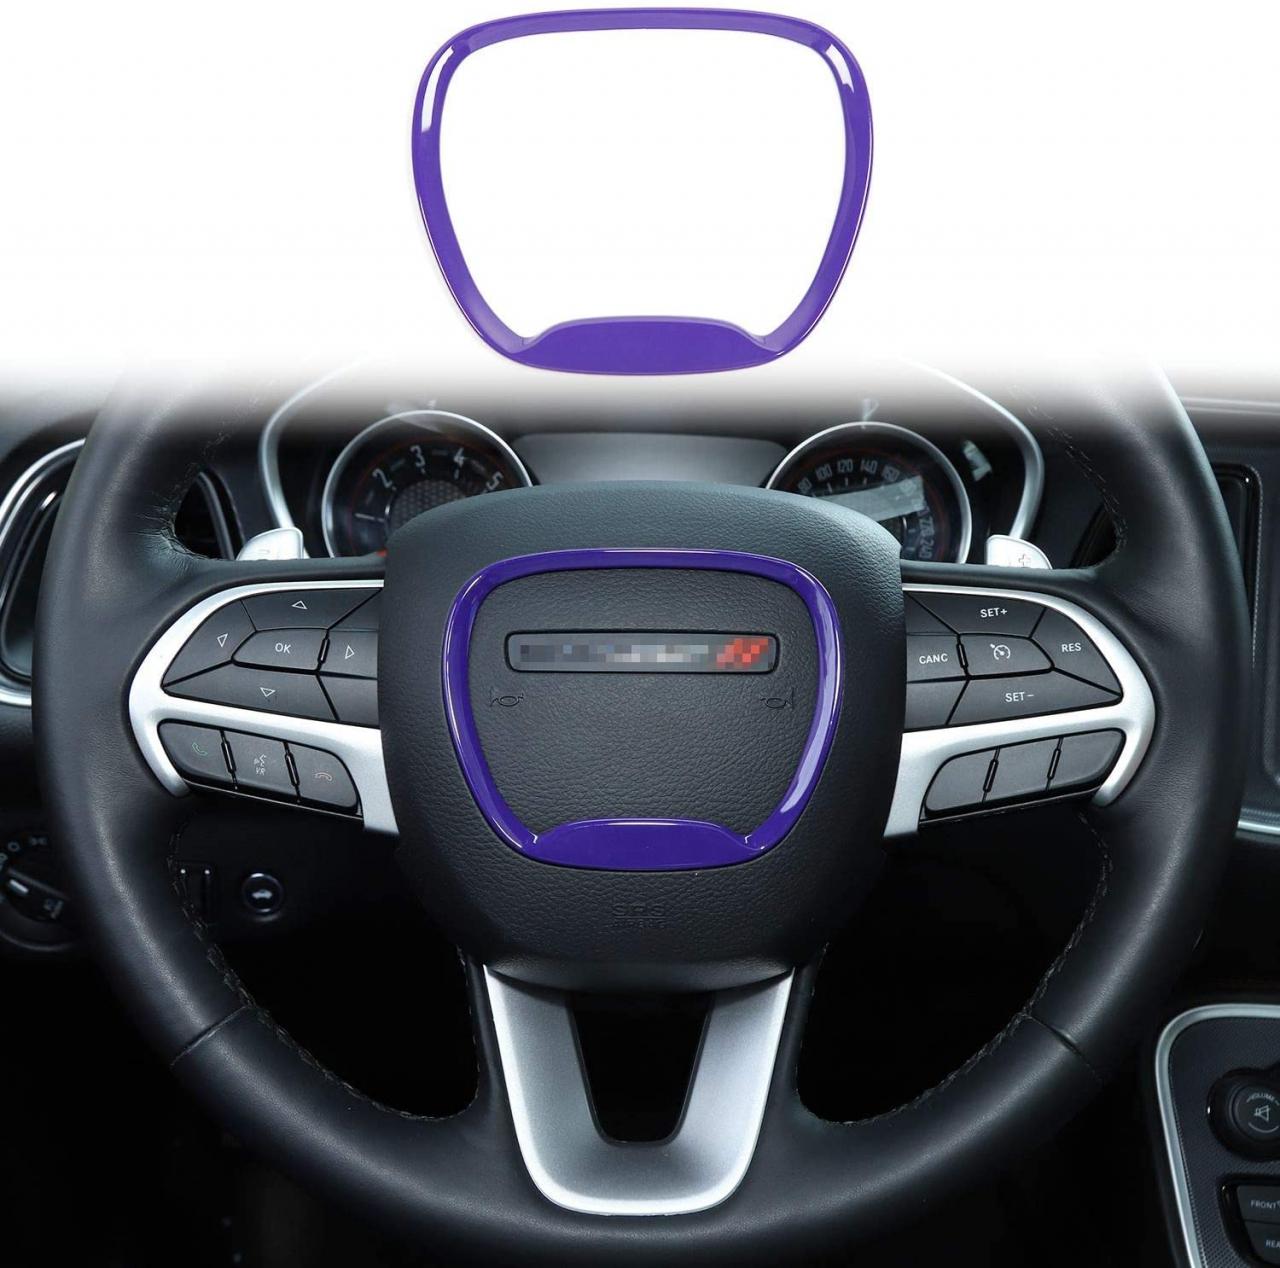 Buy Voodonala Steering Wheel Trim for 2015-2020 Dodge Challenger Charger,  for 2014-2020 Dodge Durango, for Jeep Grand Cherokee SRT8, ABS Purple 1pc  Online in Hong Kong. B08L4JF27G